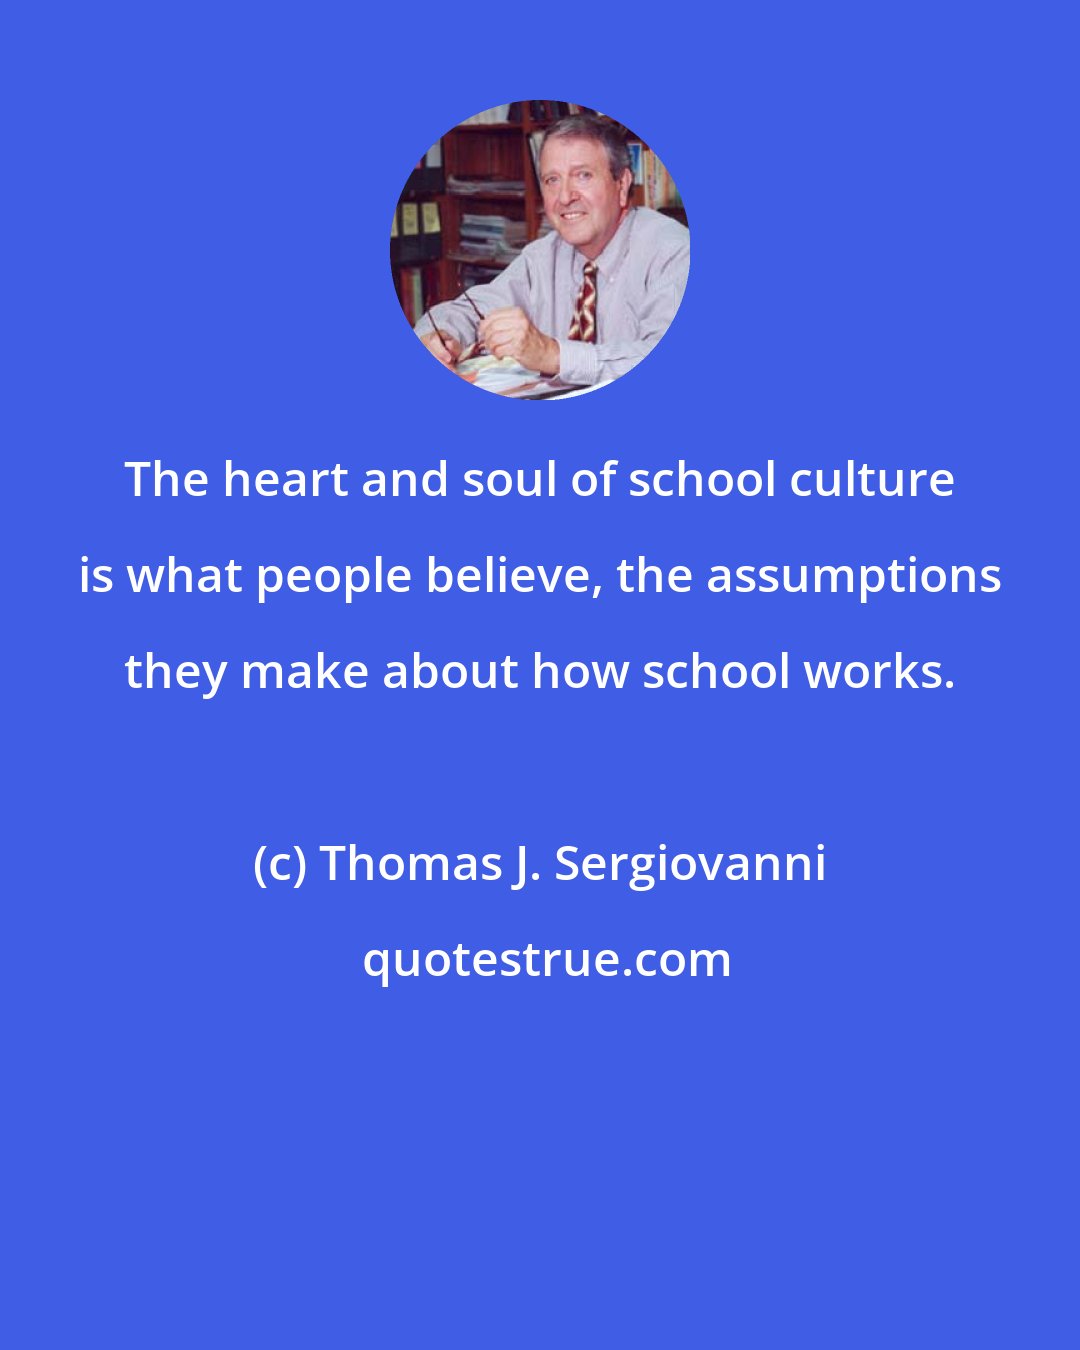 Thomas J. Sergiovanni: The heart and soul of school culture is what people believe, the assumptions they make about how school works.